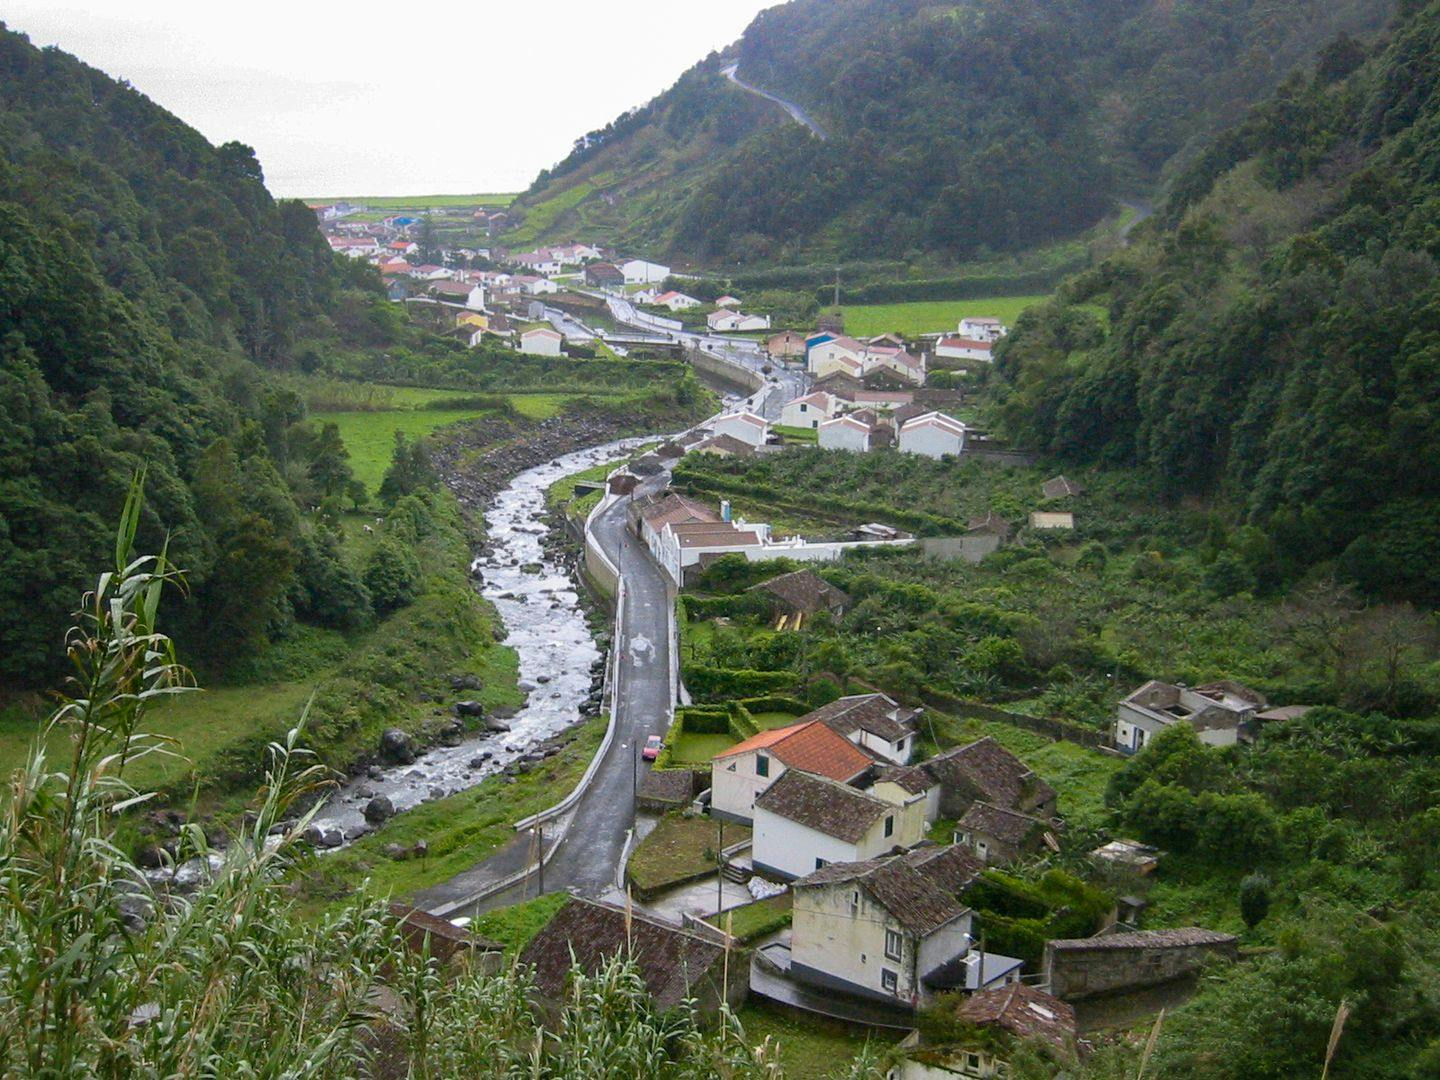 A small village on São Miguel Island. Photo: Ronald Toppe